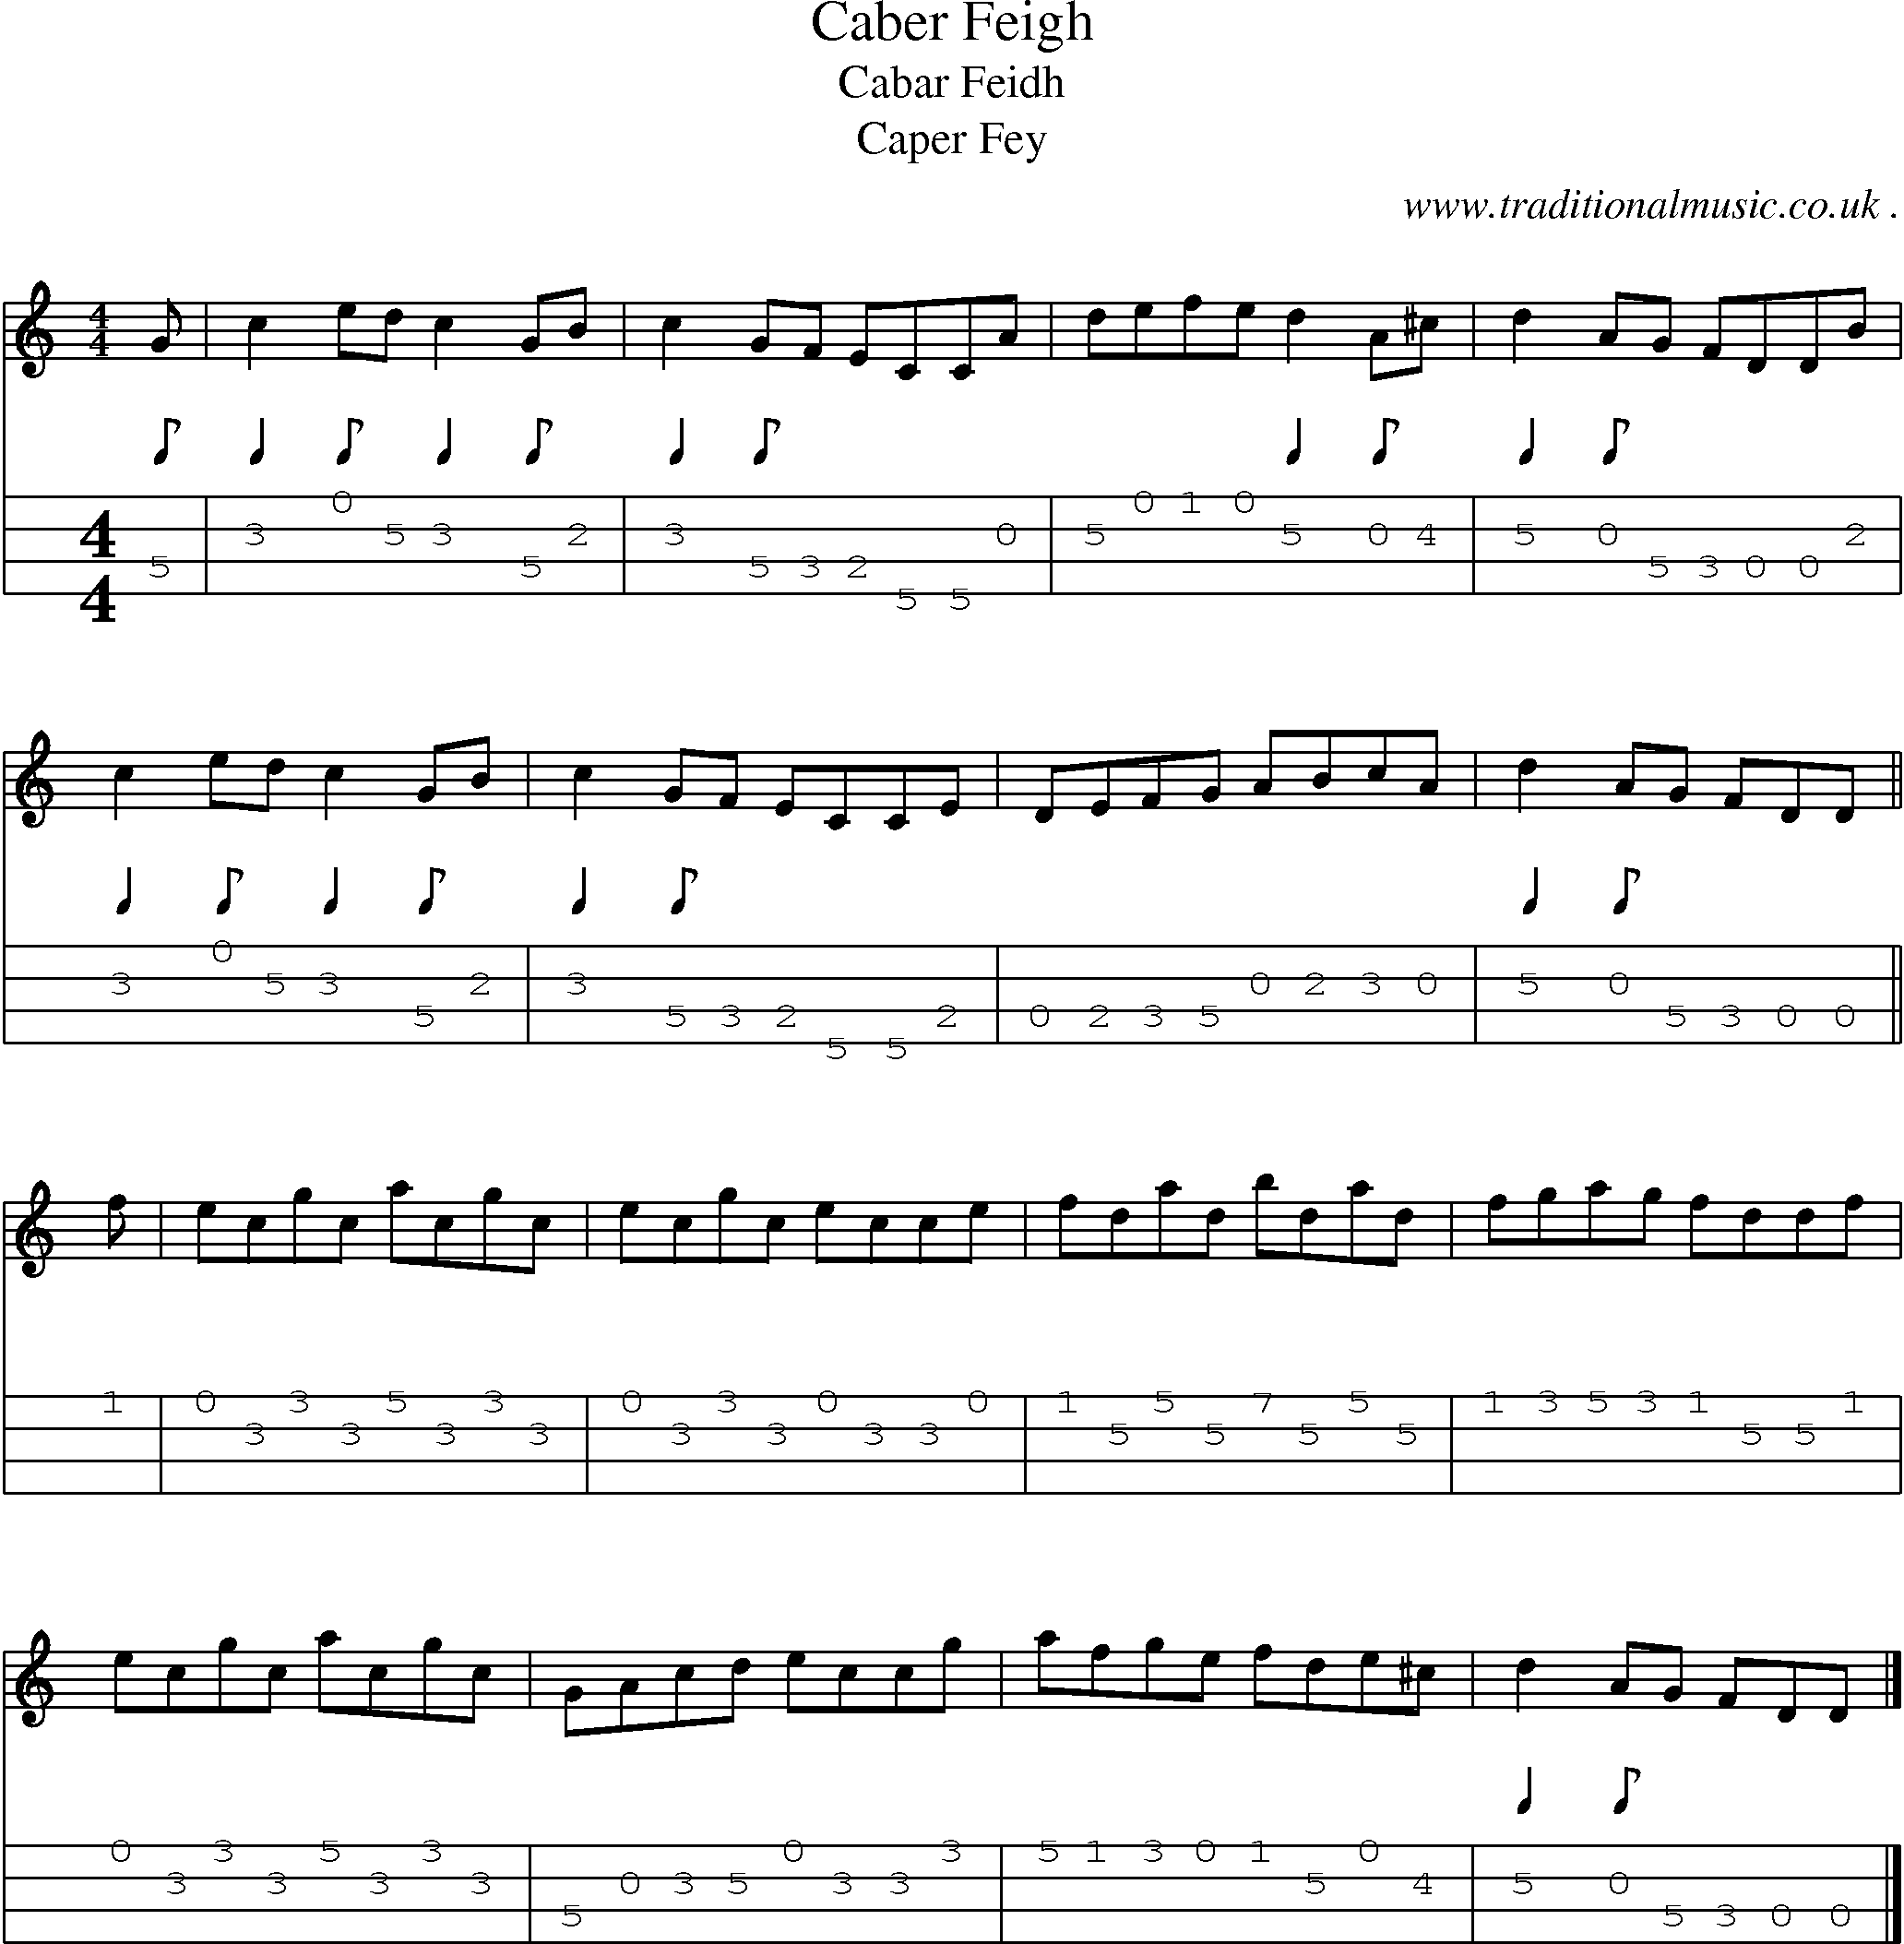 Sheet-music  score, Chords and Mandolin Tabs for Caber Feigh